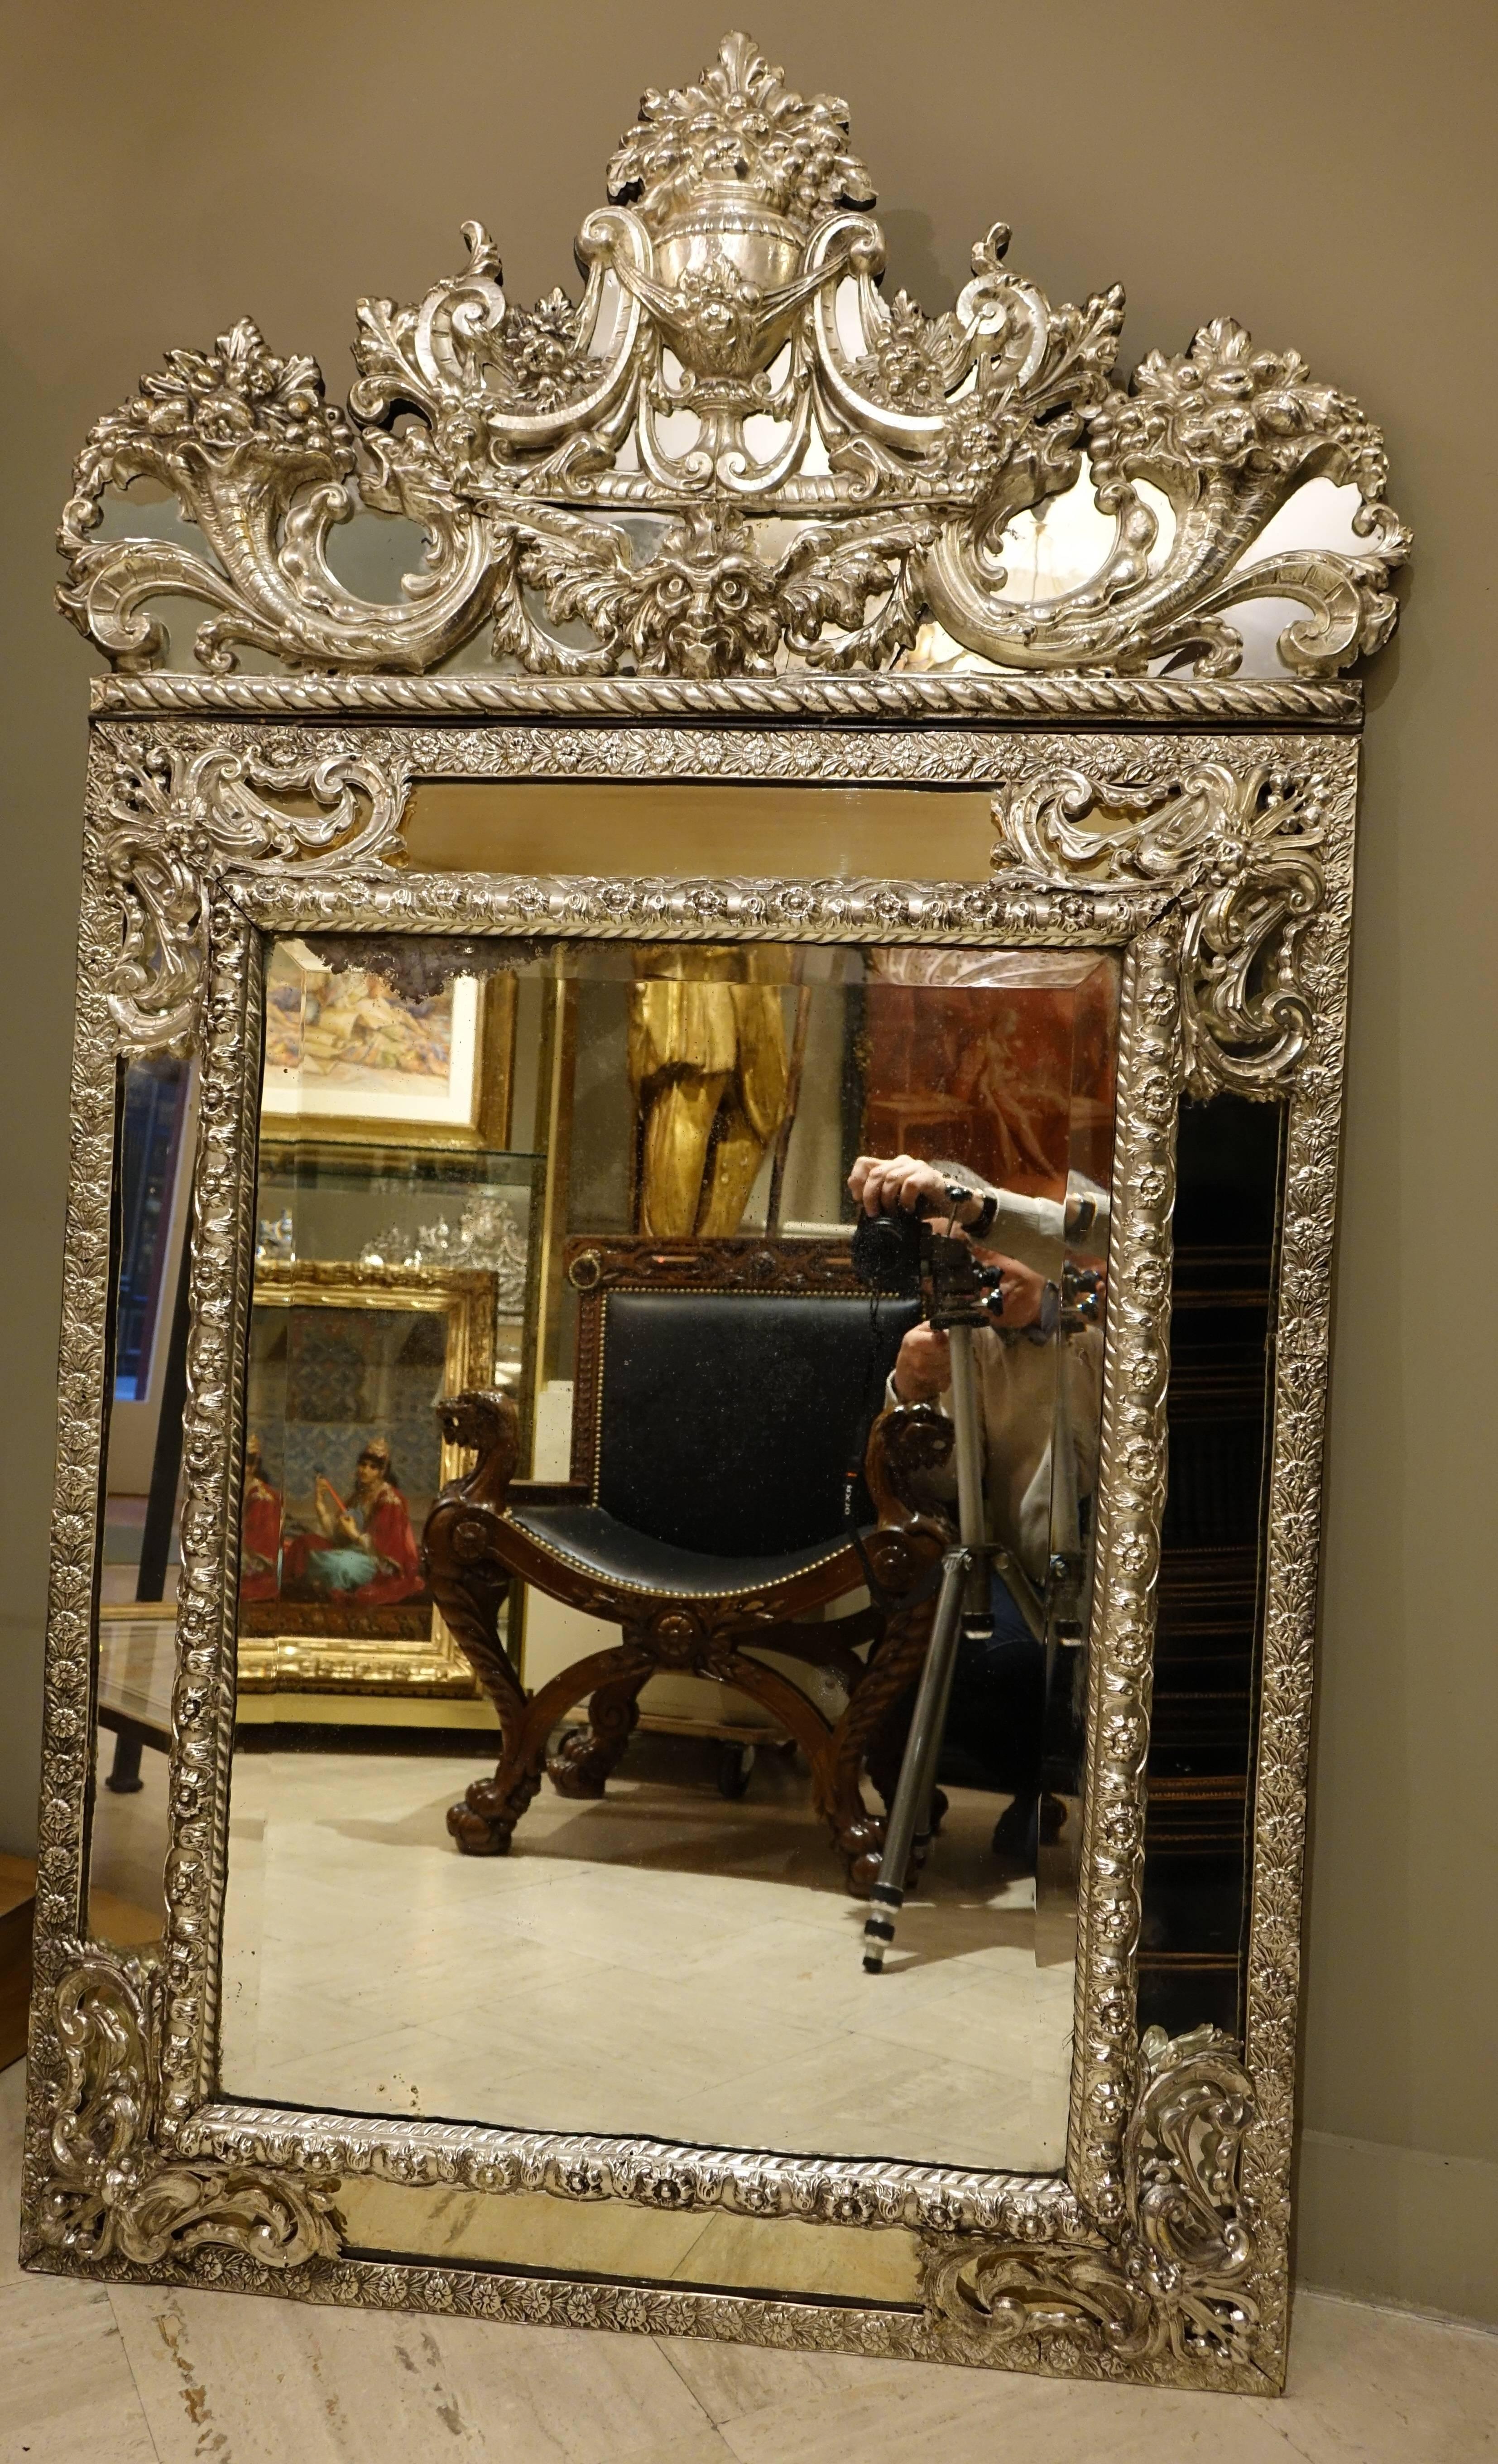 Mirror in Louis XIV style in embossed silver plated brass, France 19th century. 
The central mirror, the parclose mirrors on the sides, and the pediment have beveled edges. Decorated with scrolls, volutes, cassolettes and cornucopia 
Excellent